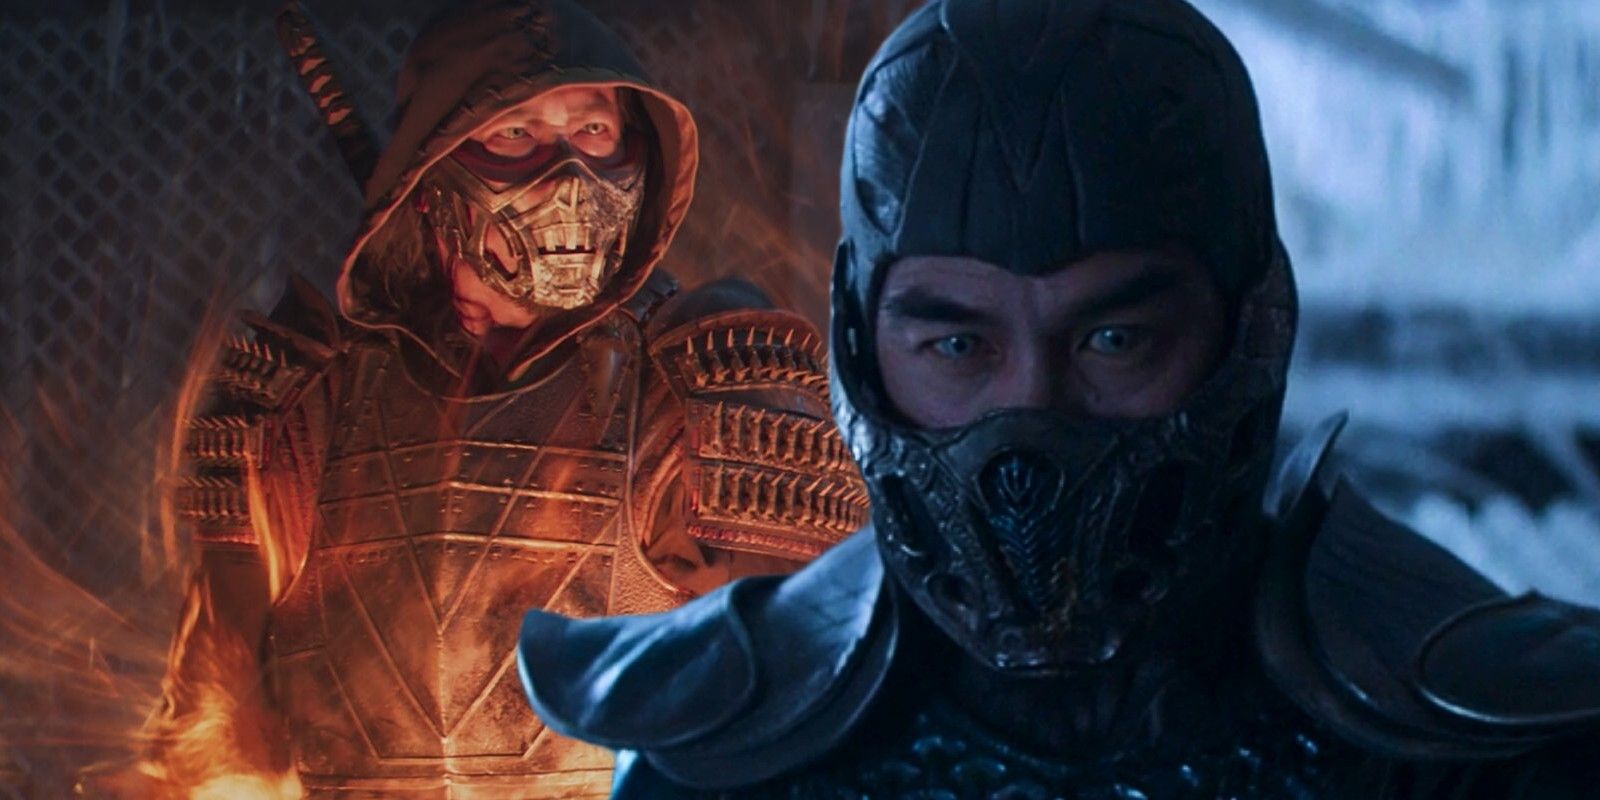 Mortal Kombat (2021): 5 Villains Who Could Be in a Sequel